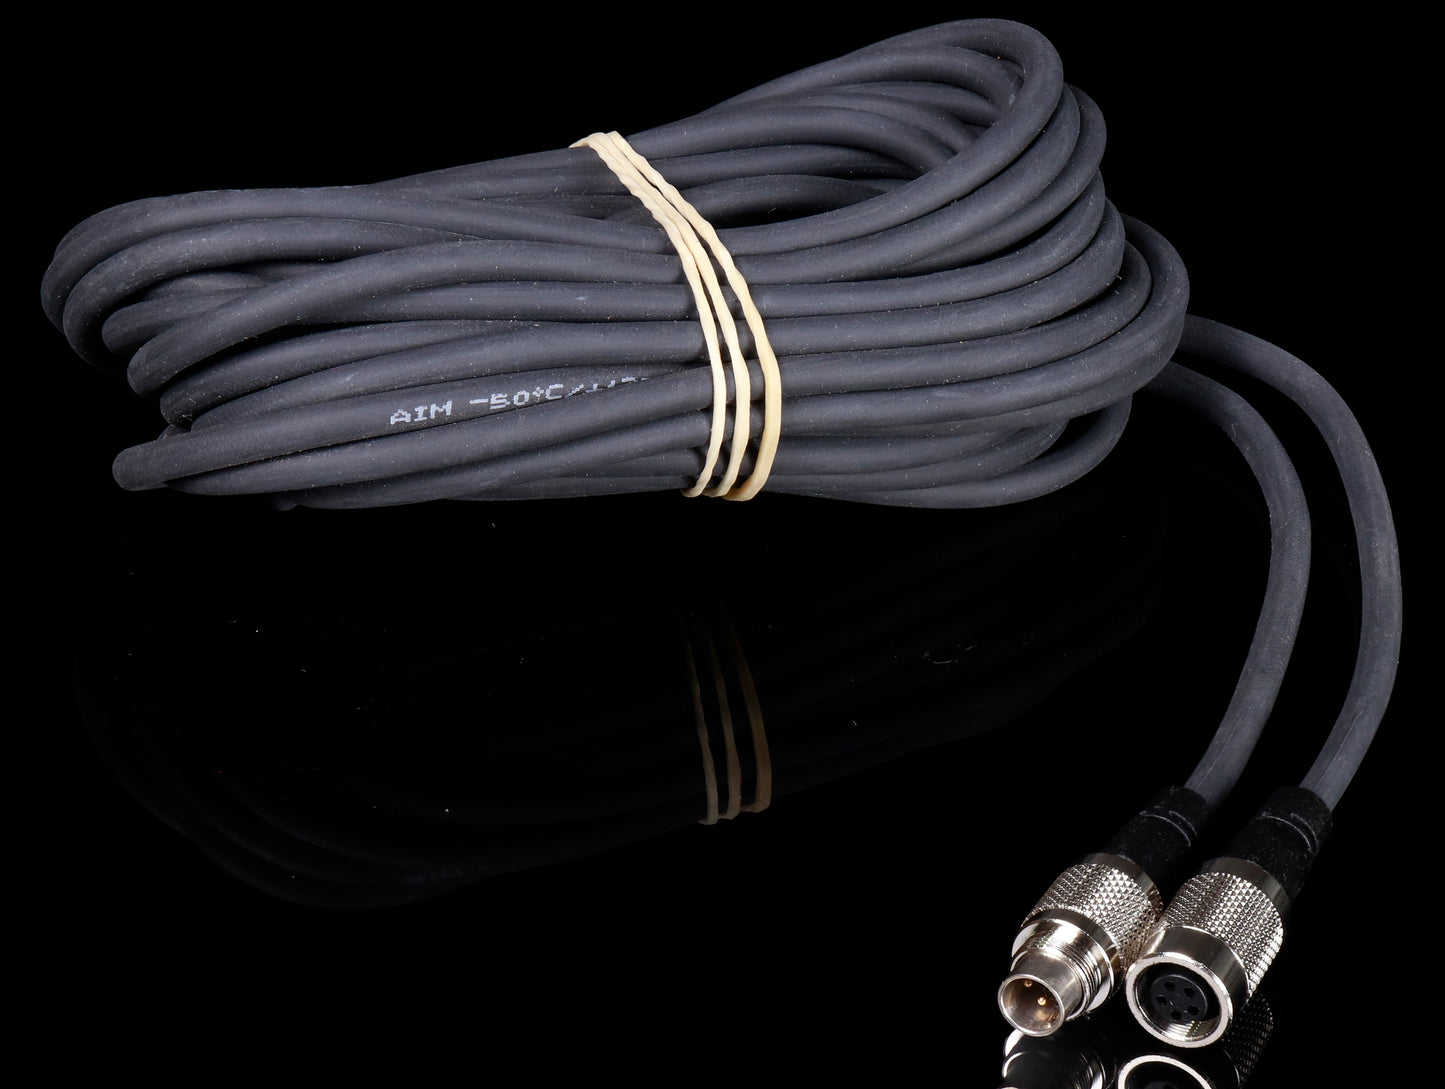 AiM Sports Patch Cables